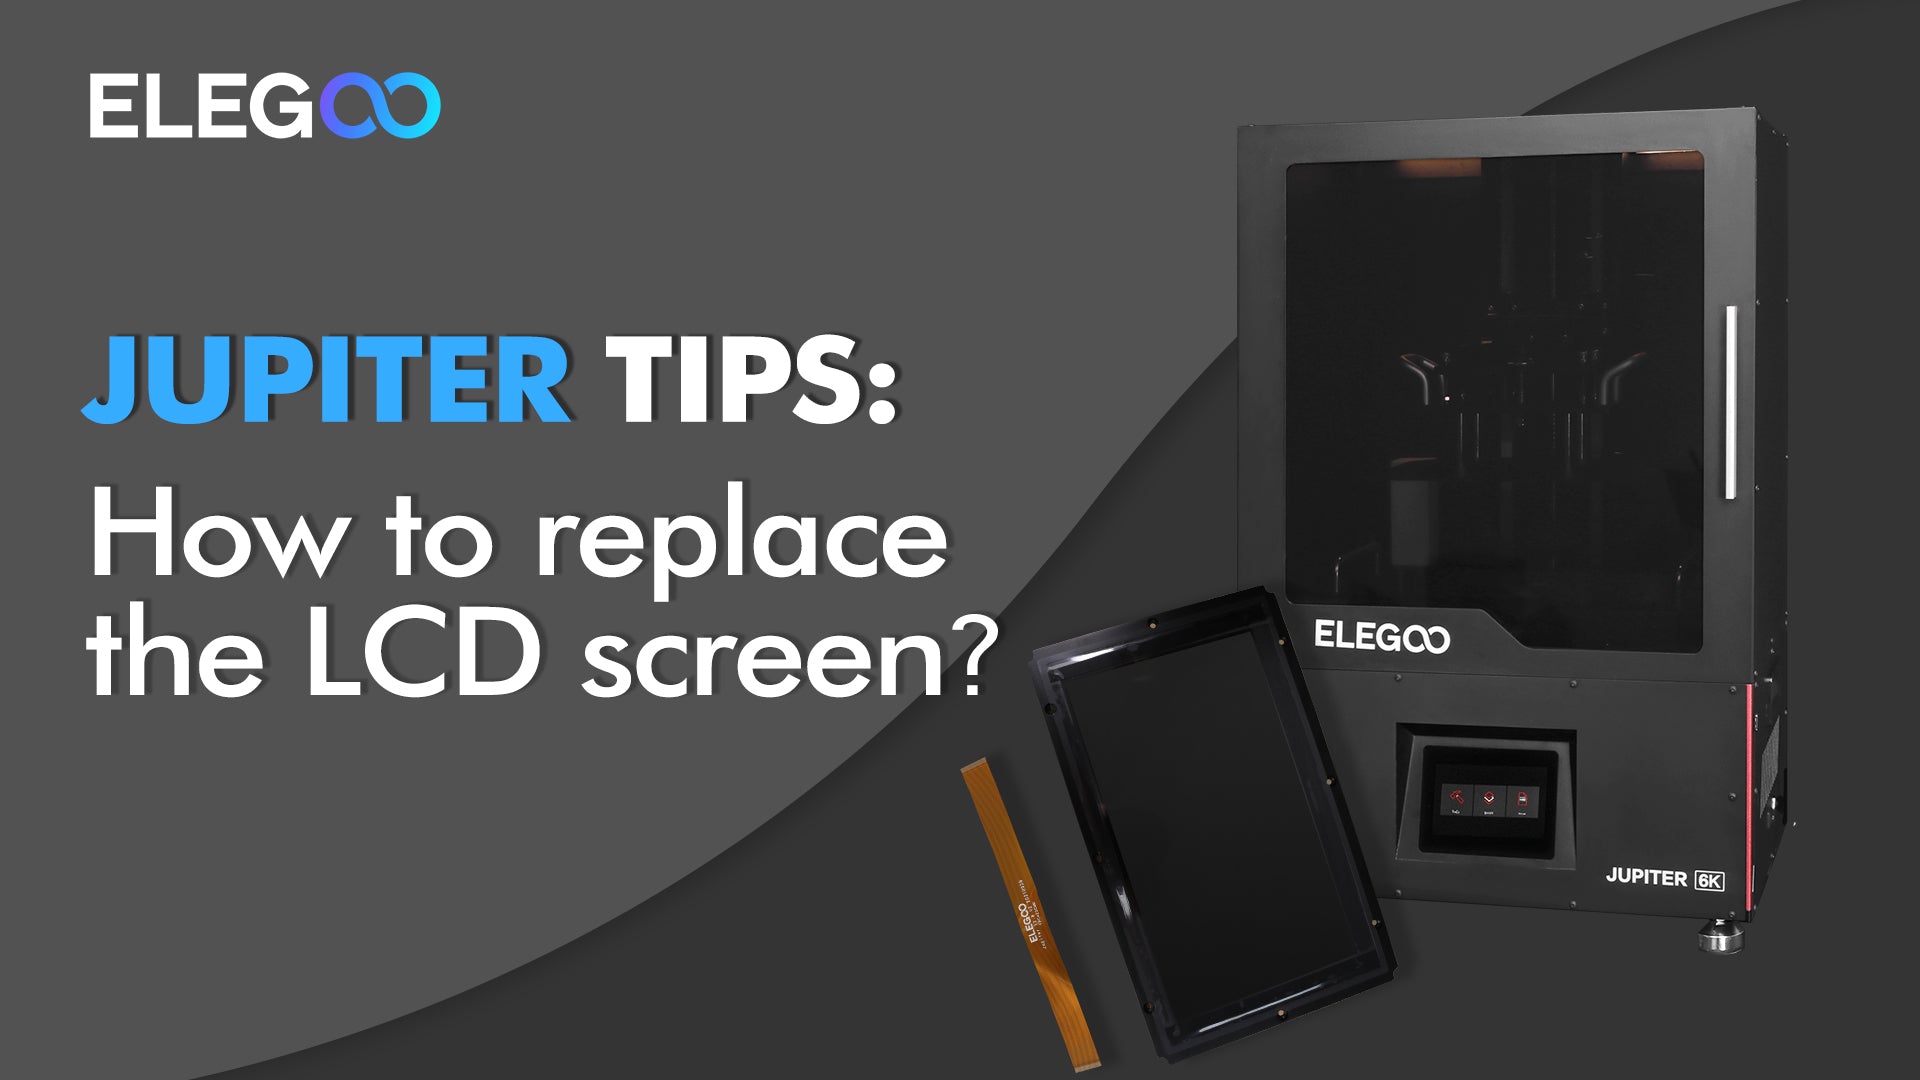 ELEGOO Jupiter: How to replace the LCD screen?